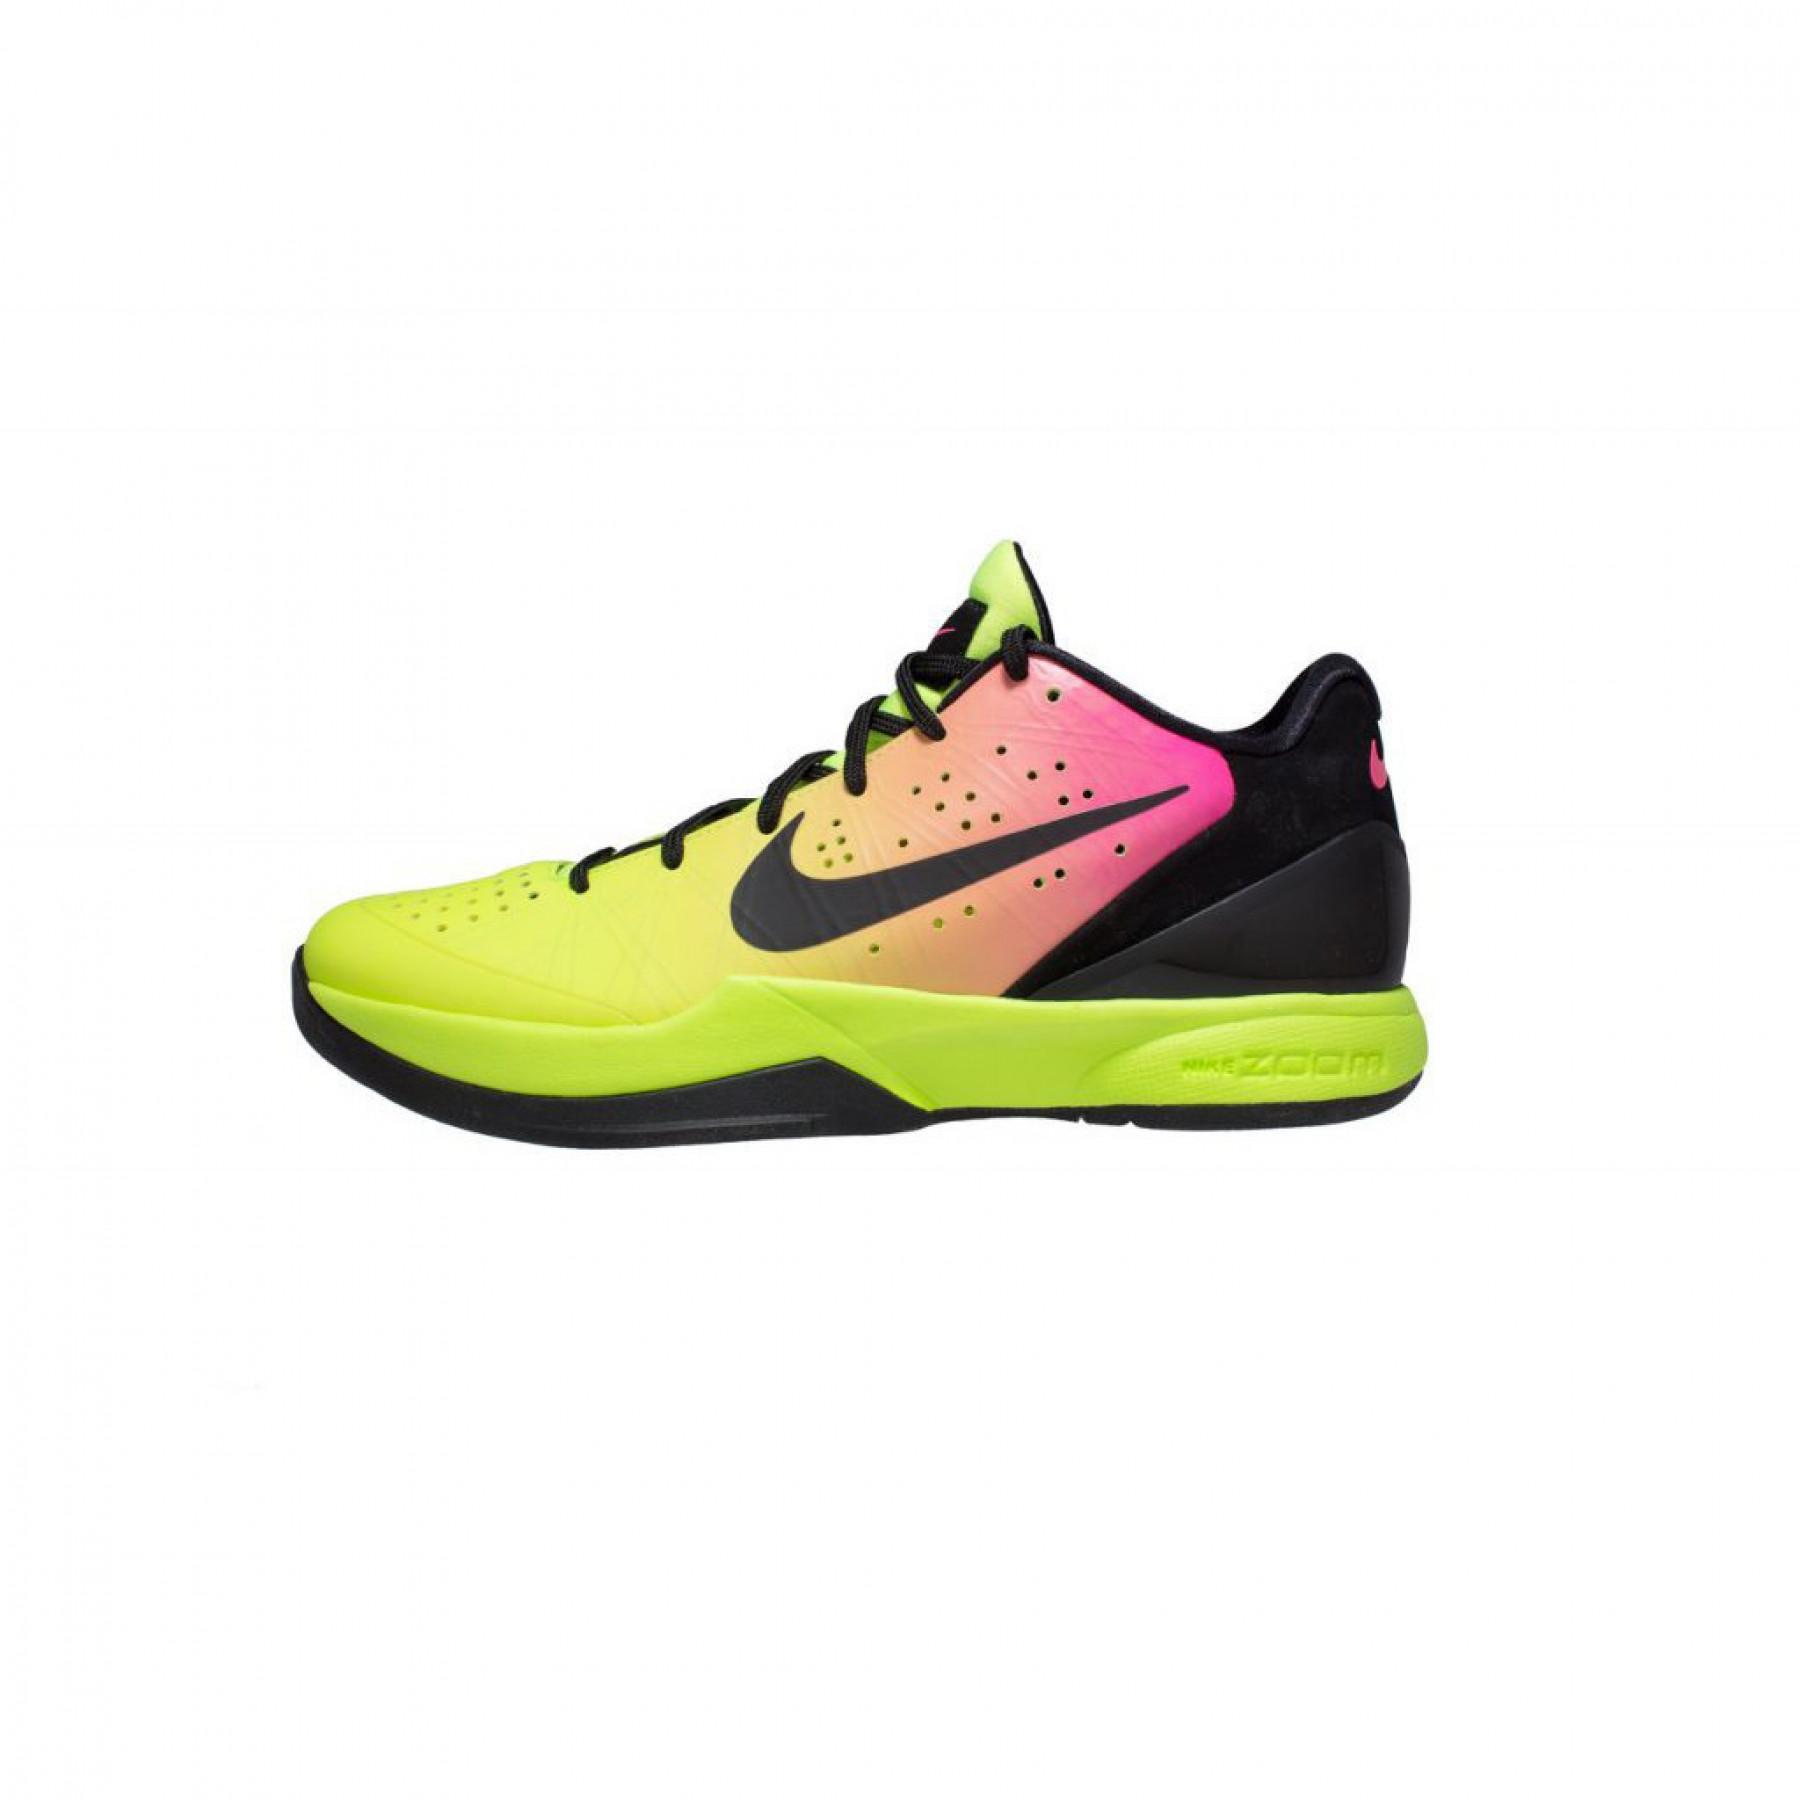 Chaussures Nike Air Zoom HyperAttack Unlimited vert fluo/rose/noir